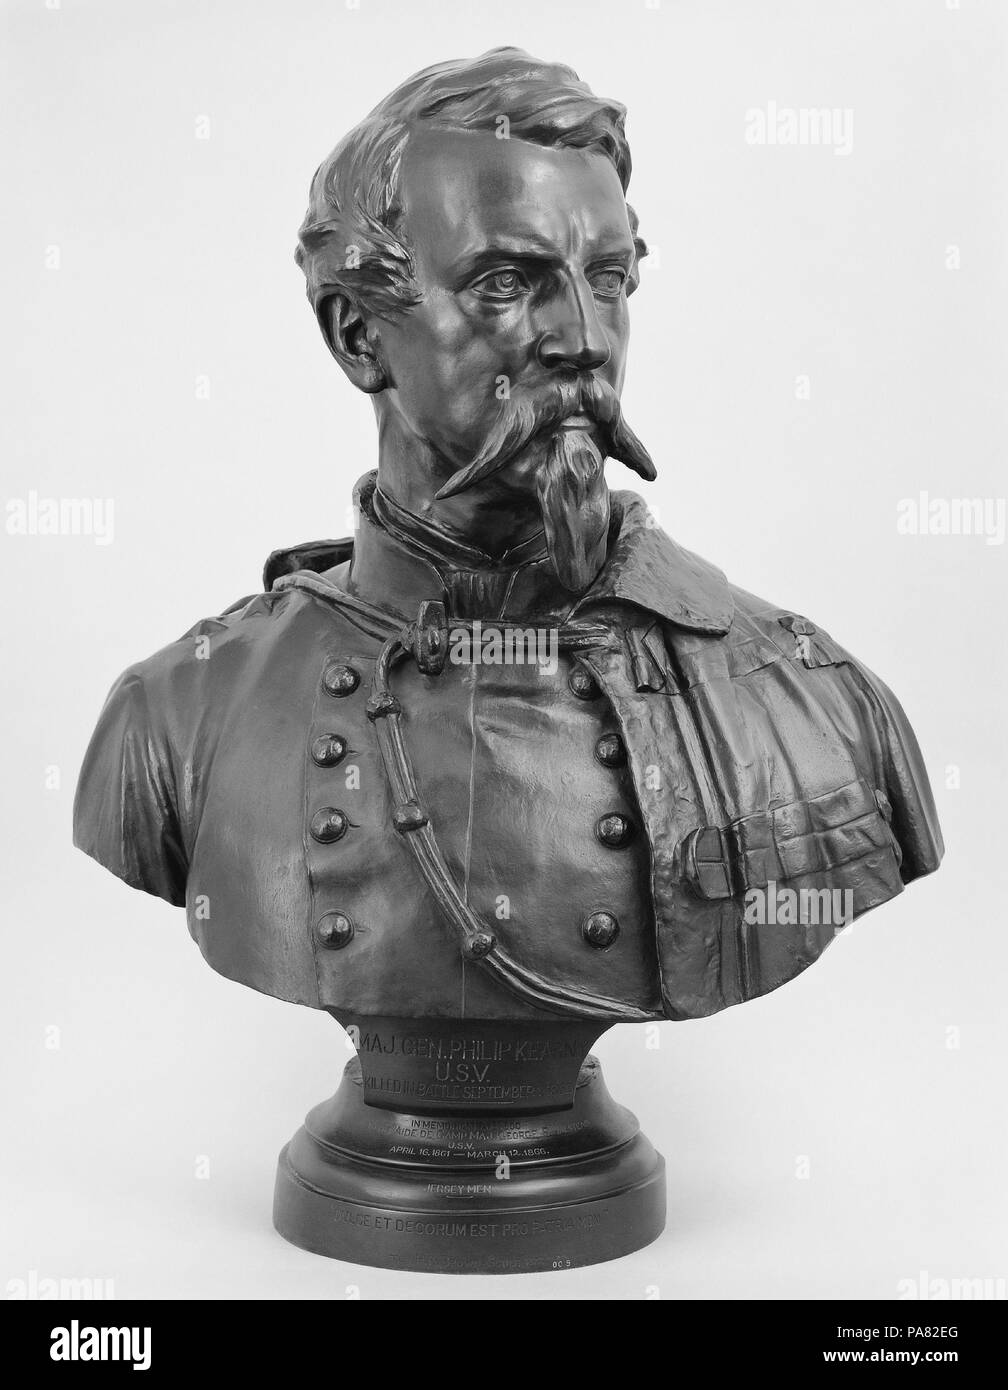 Major General Philip Kearny. Artist: Henry Kirke Brown (American, Leyden, Massachusetts 1814-1886 Newburgh, New York). Dimensions: 30 1/2 x 22 3/4 x 13 1/2 in. (77.5 x 57.8 x 34.3 cm). Date: 1872, cast 1900.  While Brown was modeling a statue of Major General Philip Kearny for the United States Capitol in the early 1870s, the Kearny family probably commissioned him to execute this portrait bust (now in the Town Hall, Kearny, New Jersey). This cast of the sculpture was later ordered by Major General George B. Halstead, who once served under Kearny's command. From his first commission as 2nd Lie Stock Photo